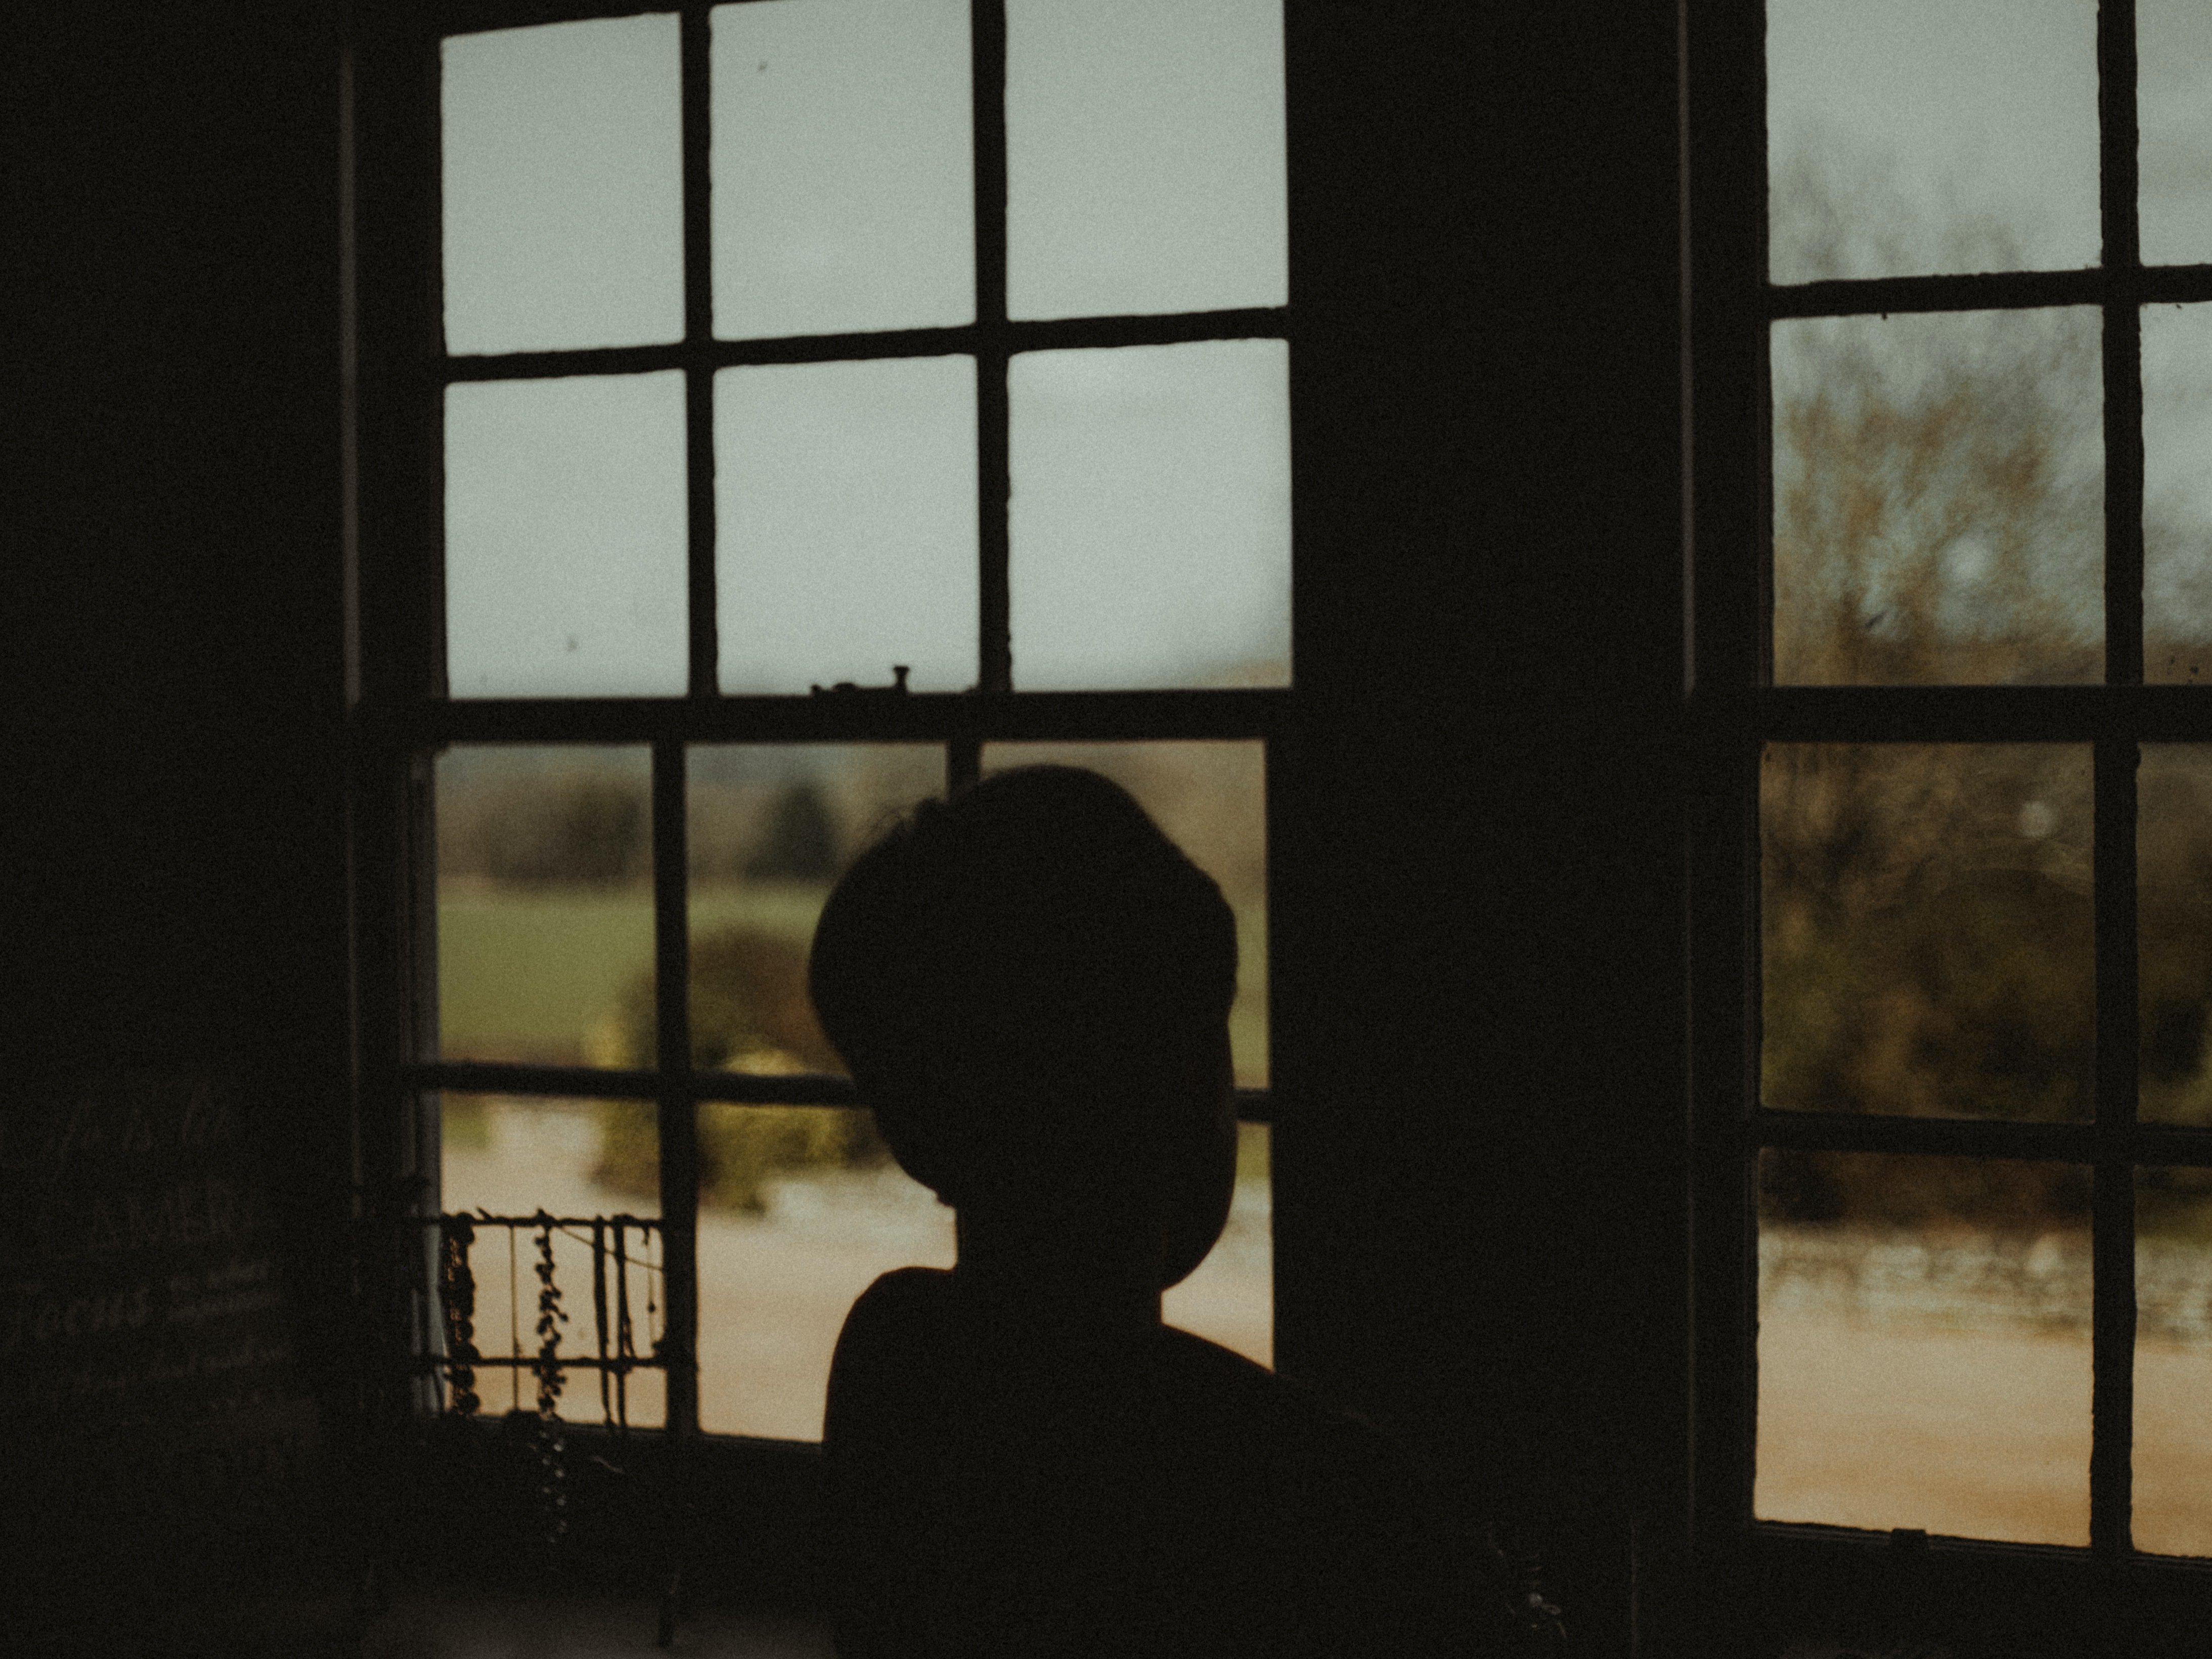 Little Louie always stood by the window, waiting for his mom. | Source: Pexels